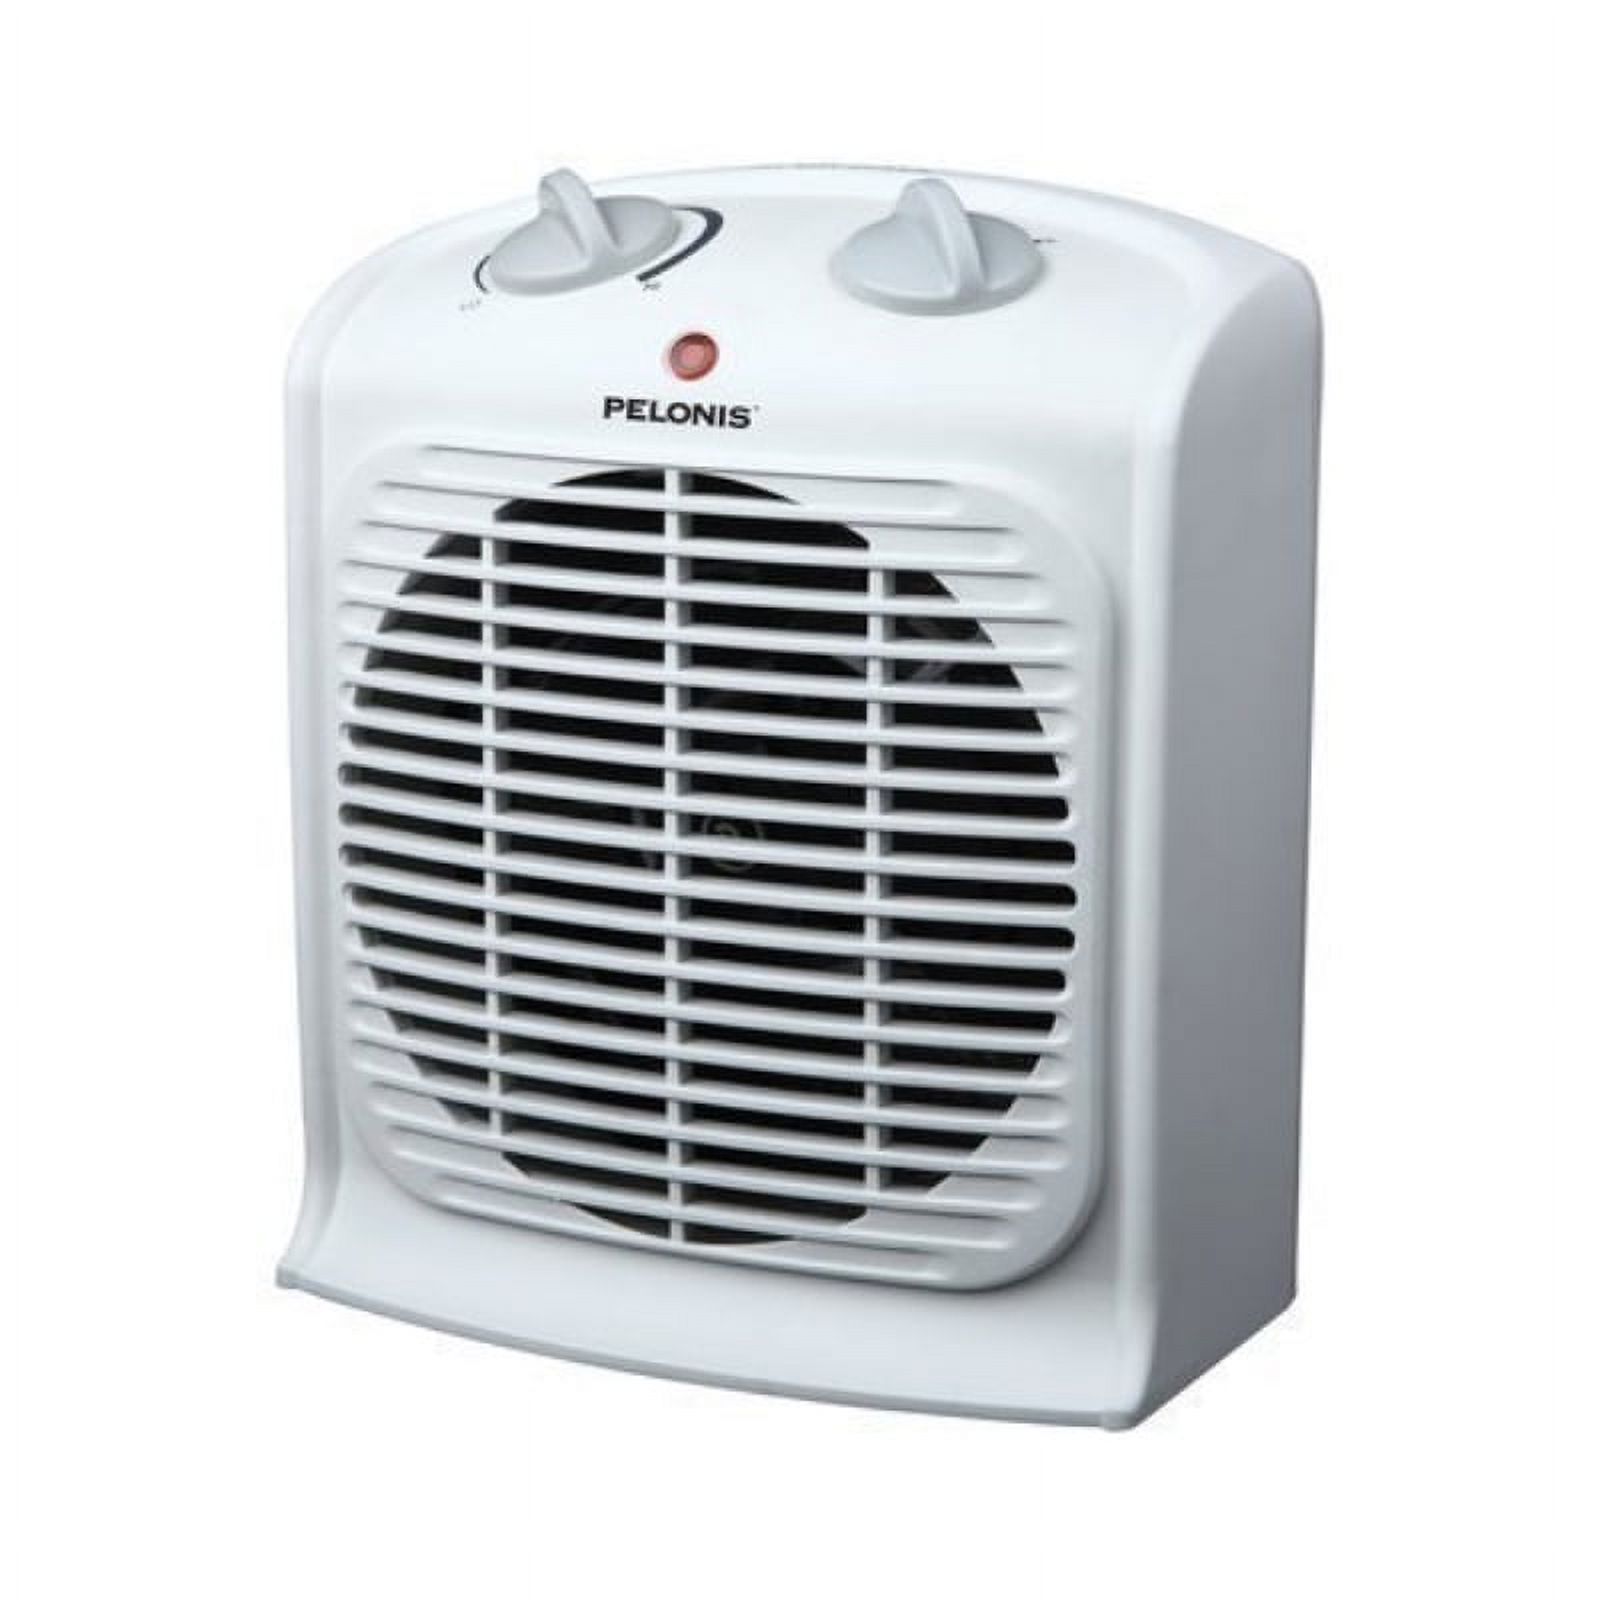 Pelonis Fan-Forced Heater with Thermostat - image 1 of 6